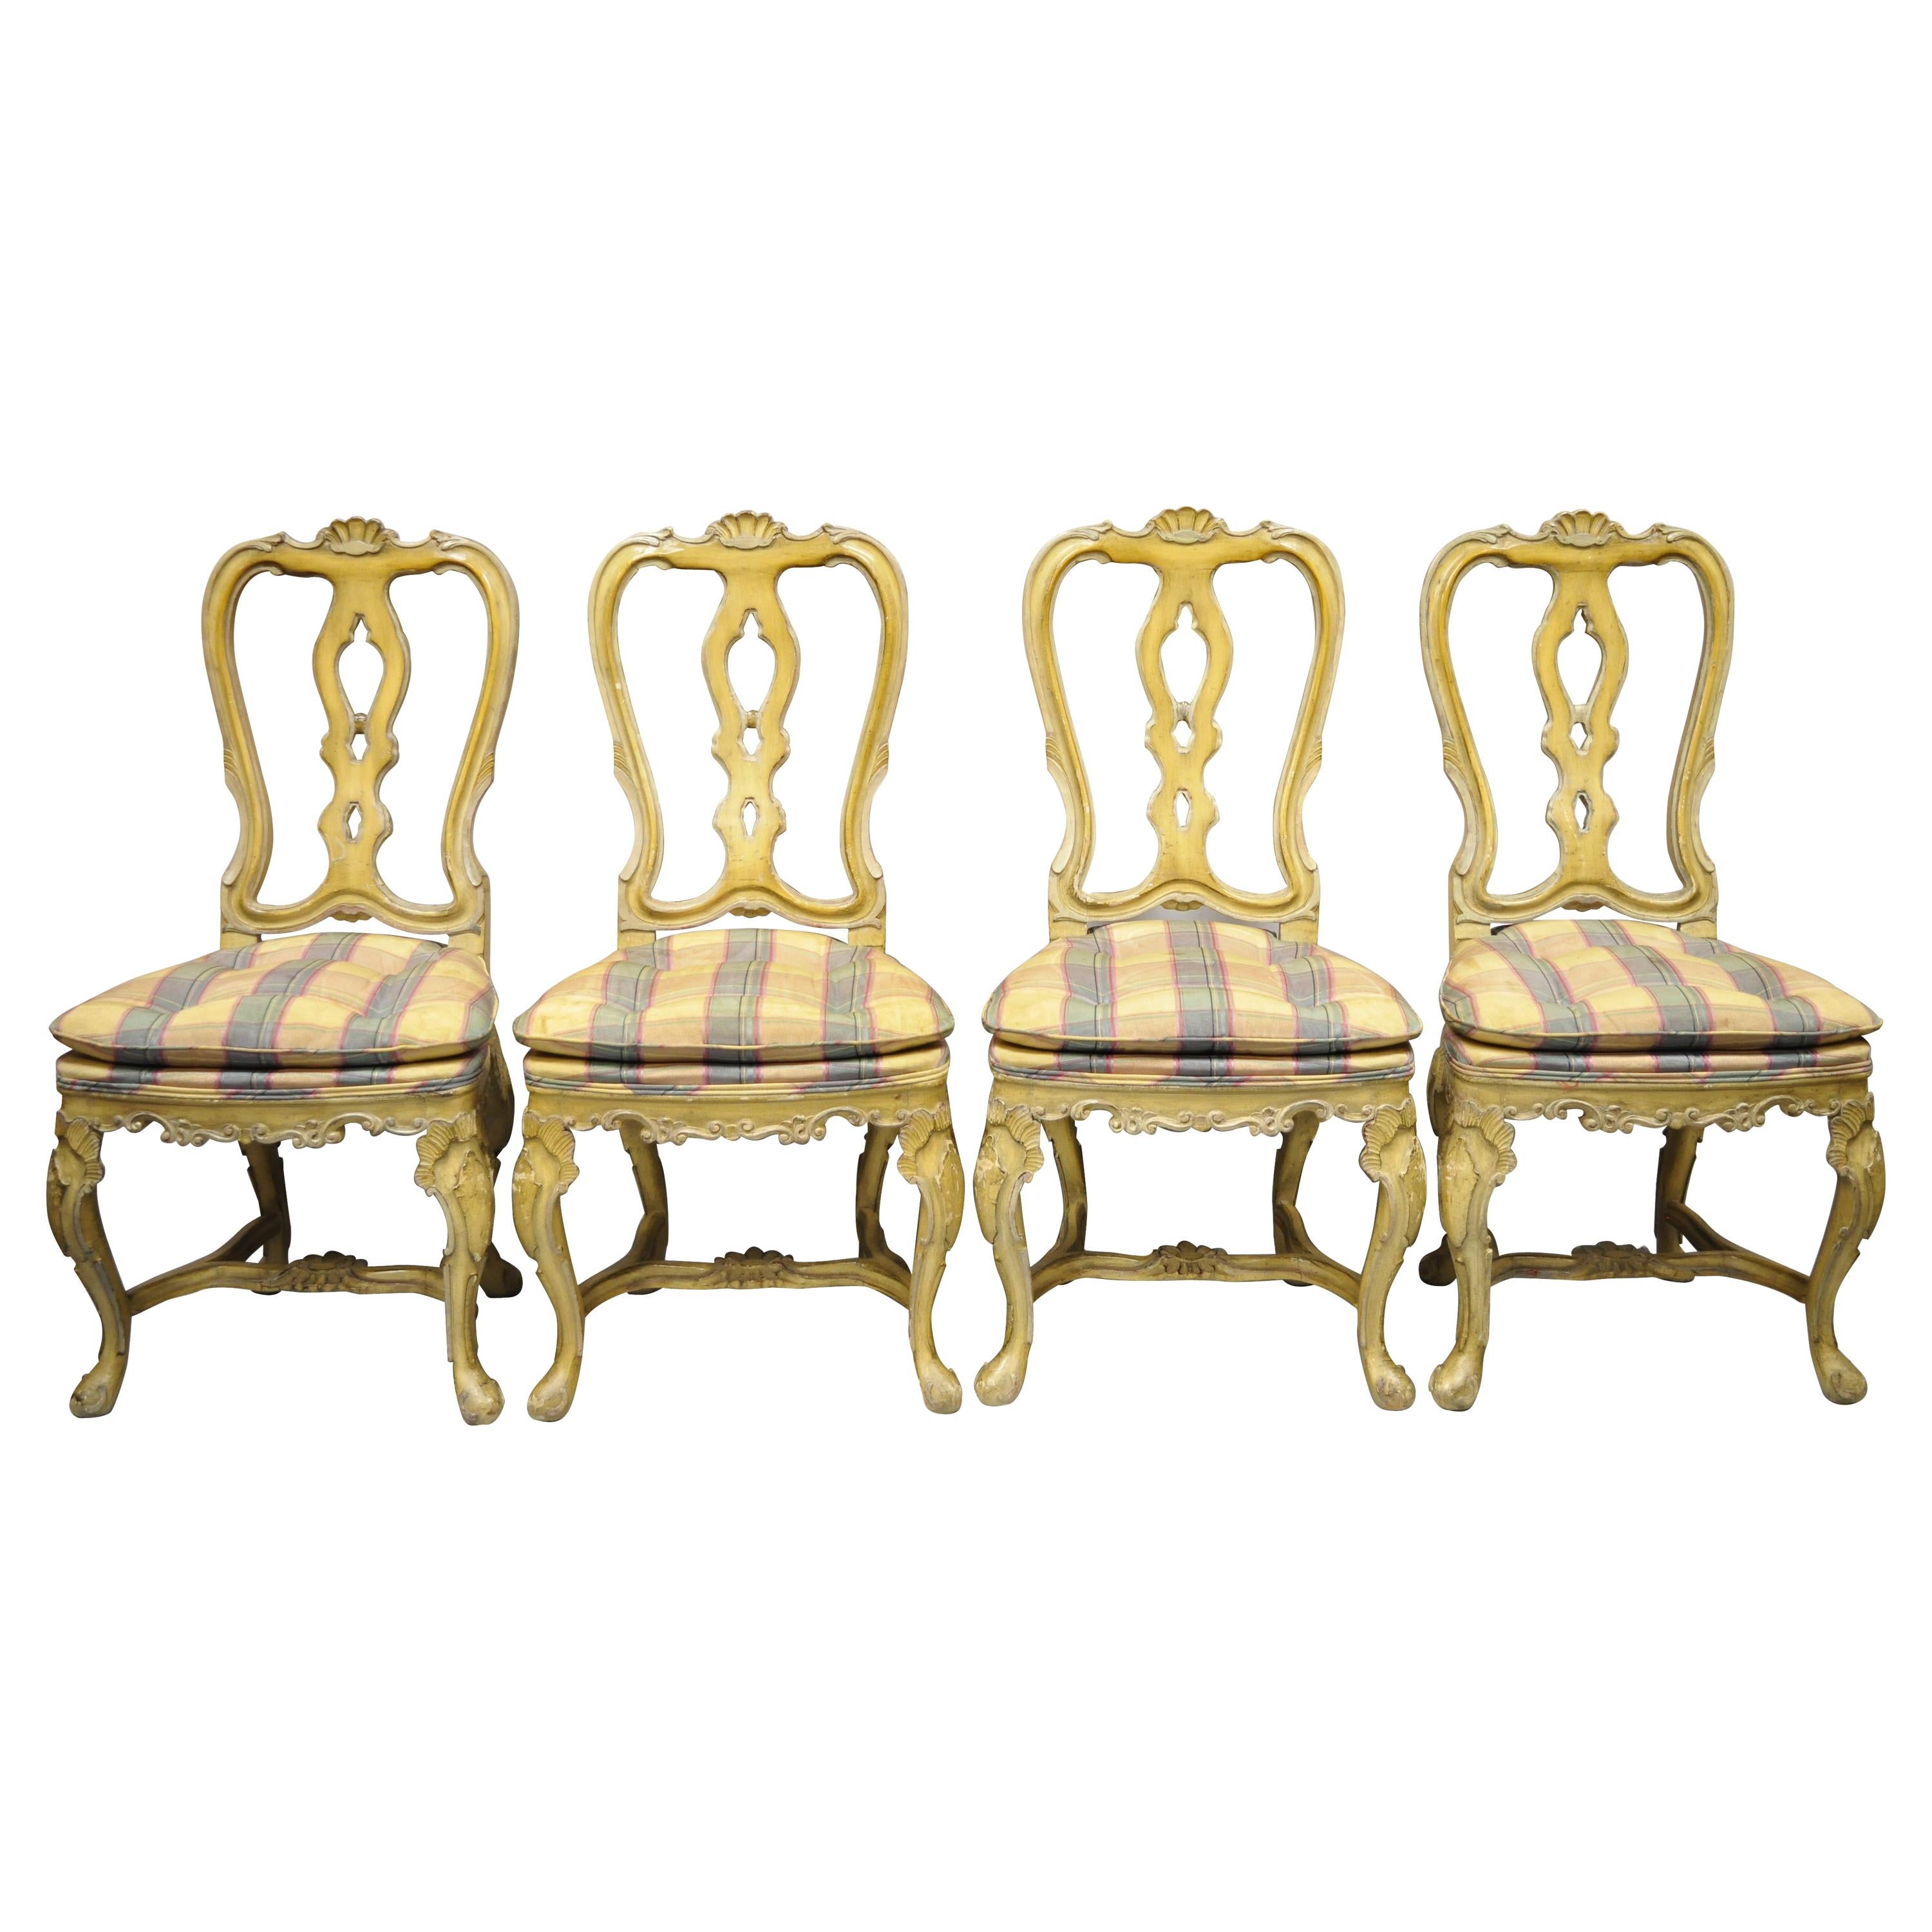 Vintage Italian Rococo Baroque Cream Distress Painted Dining Chairs, Set of 4